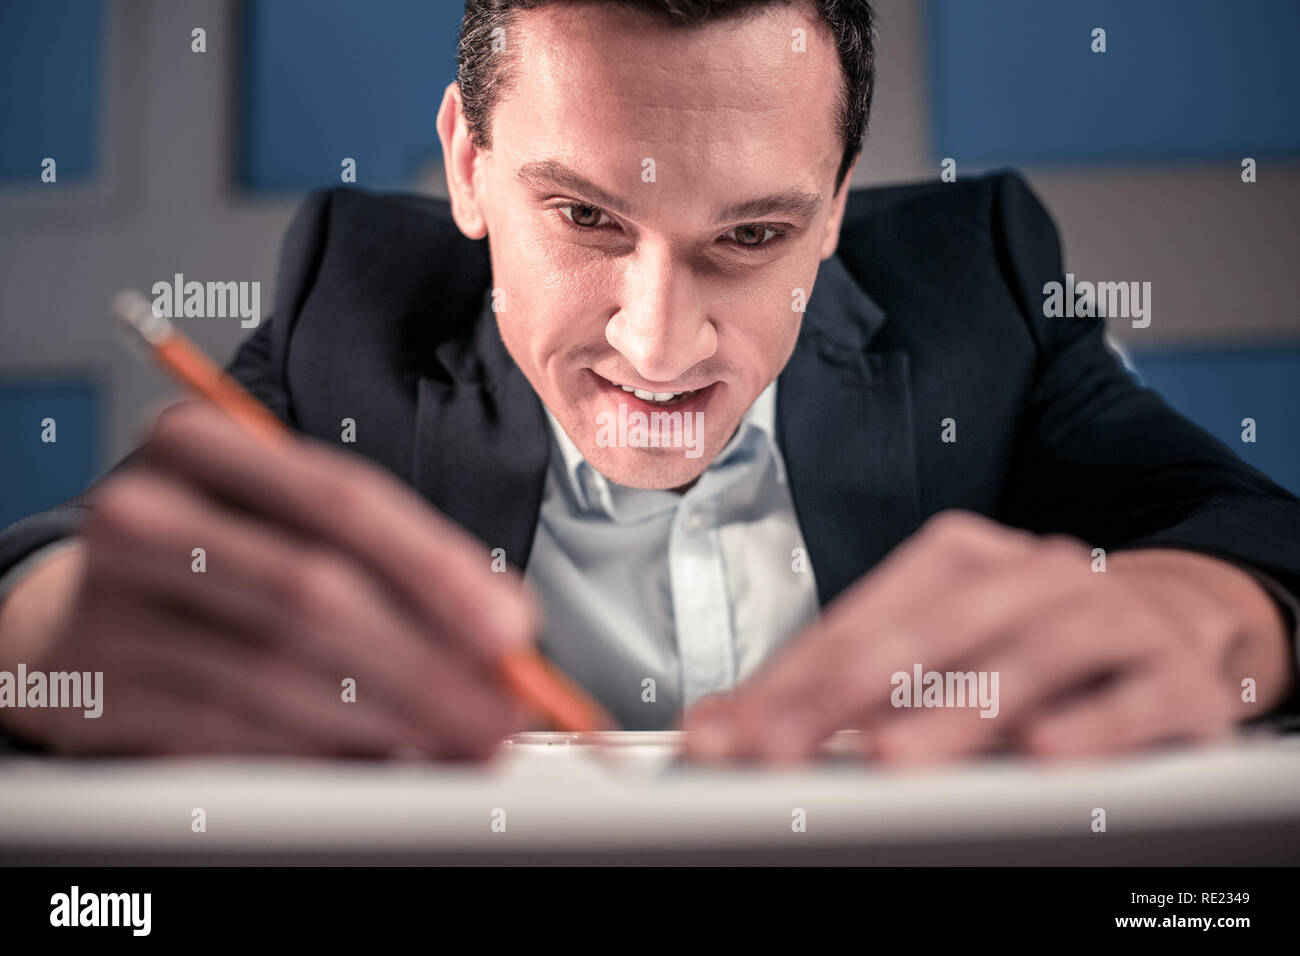 Smart enthusiastic engineer working on the project Stock Photo